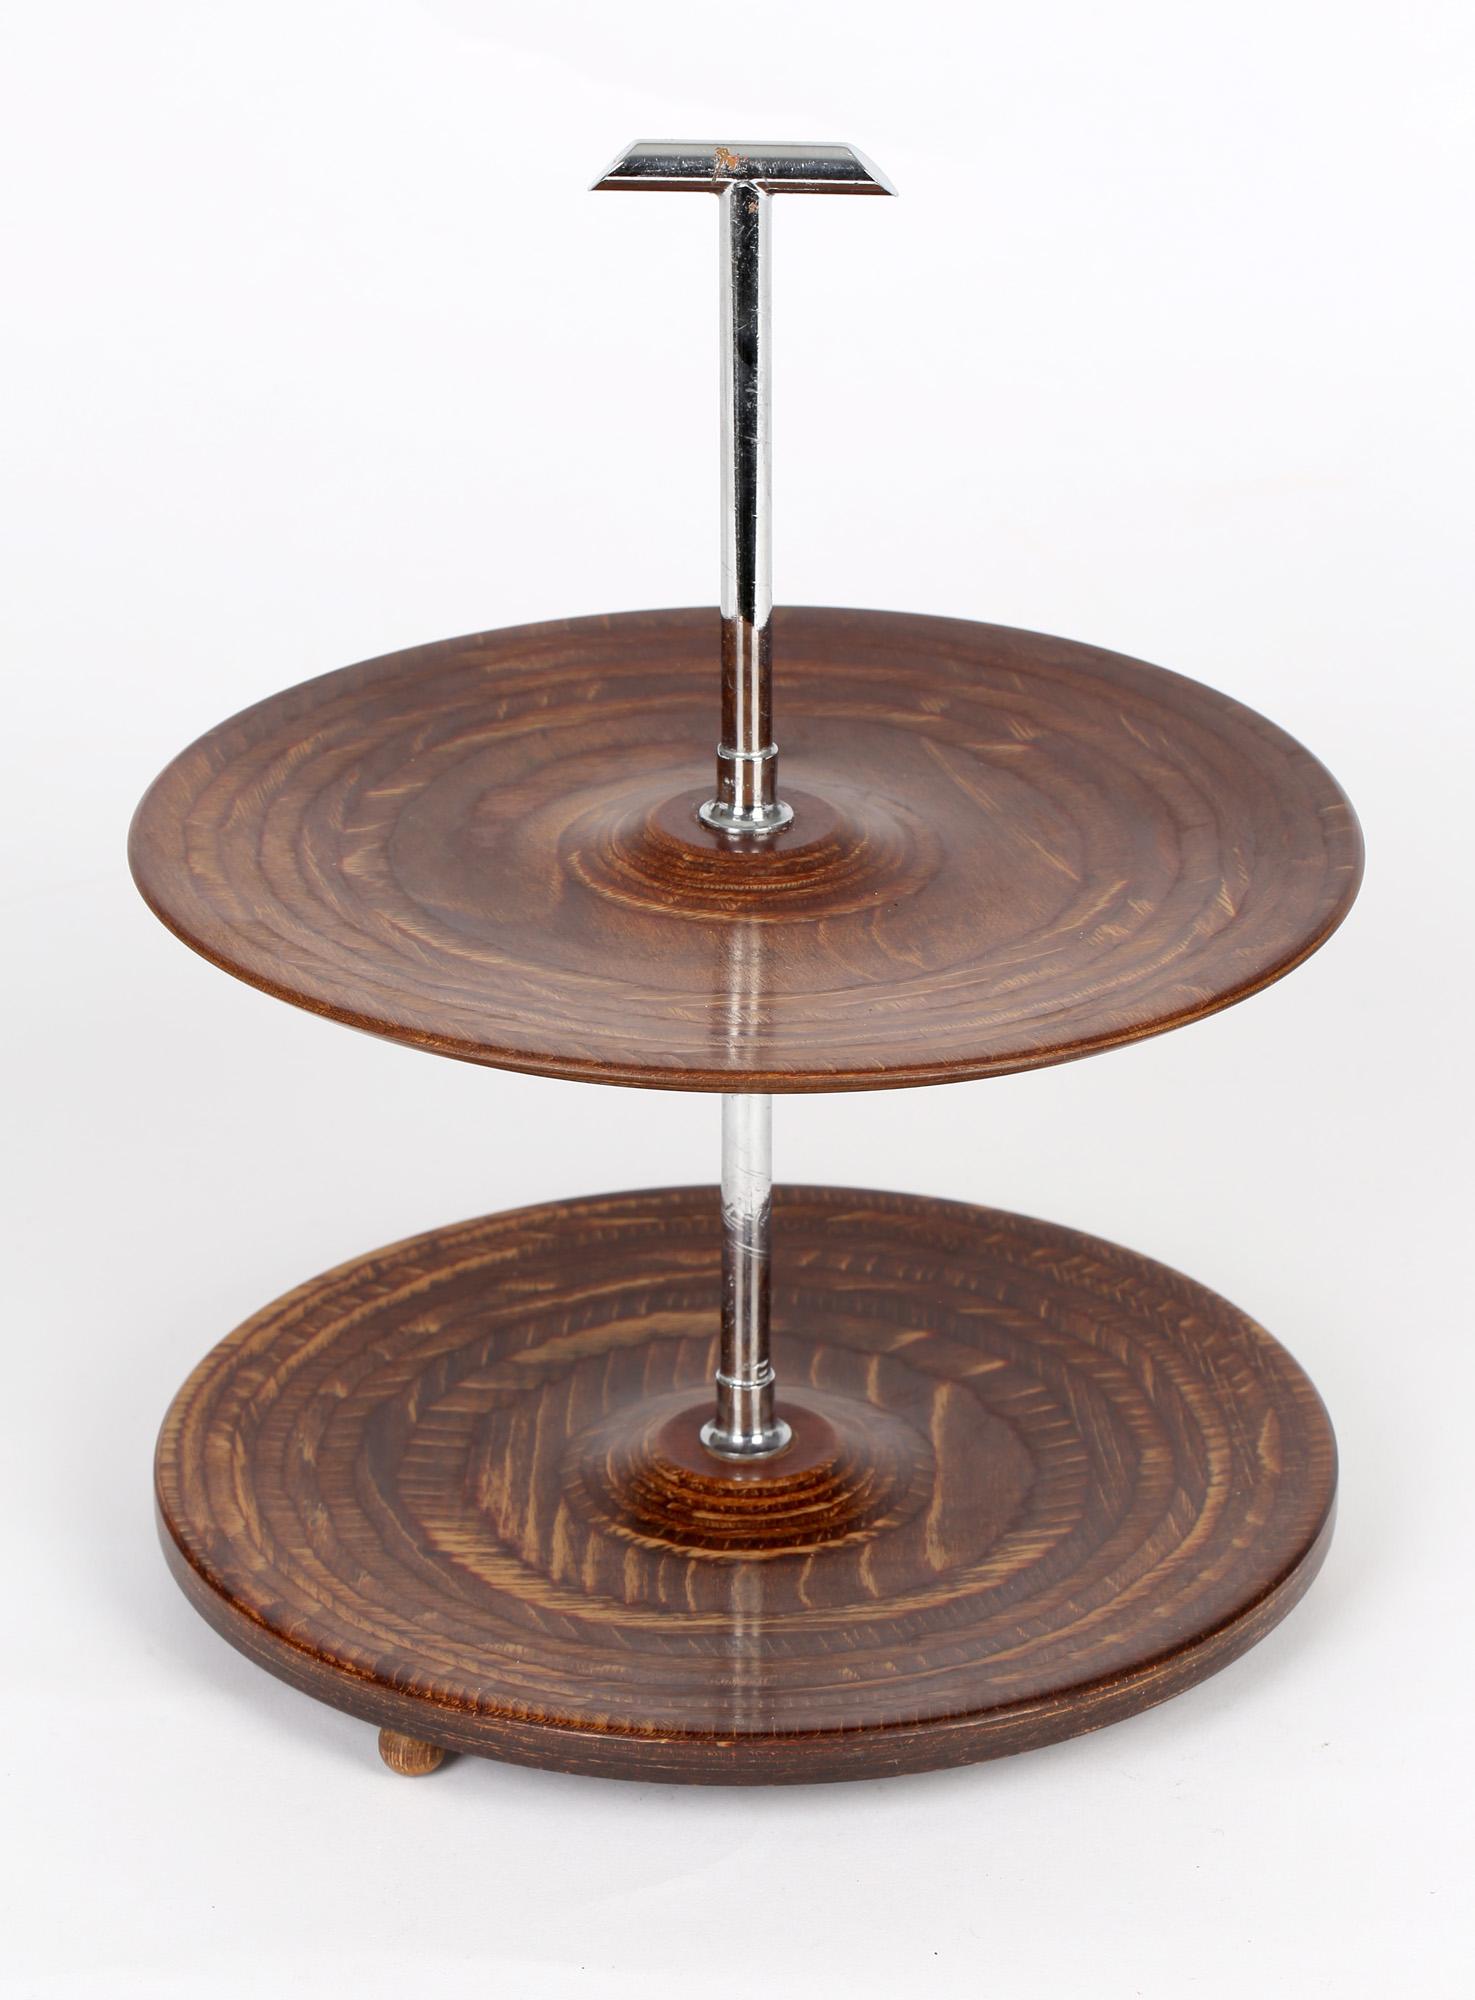 wooden tiered cake stand